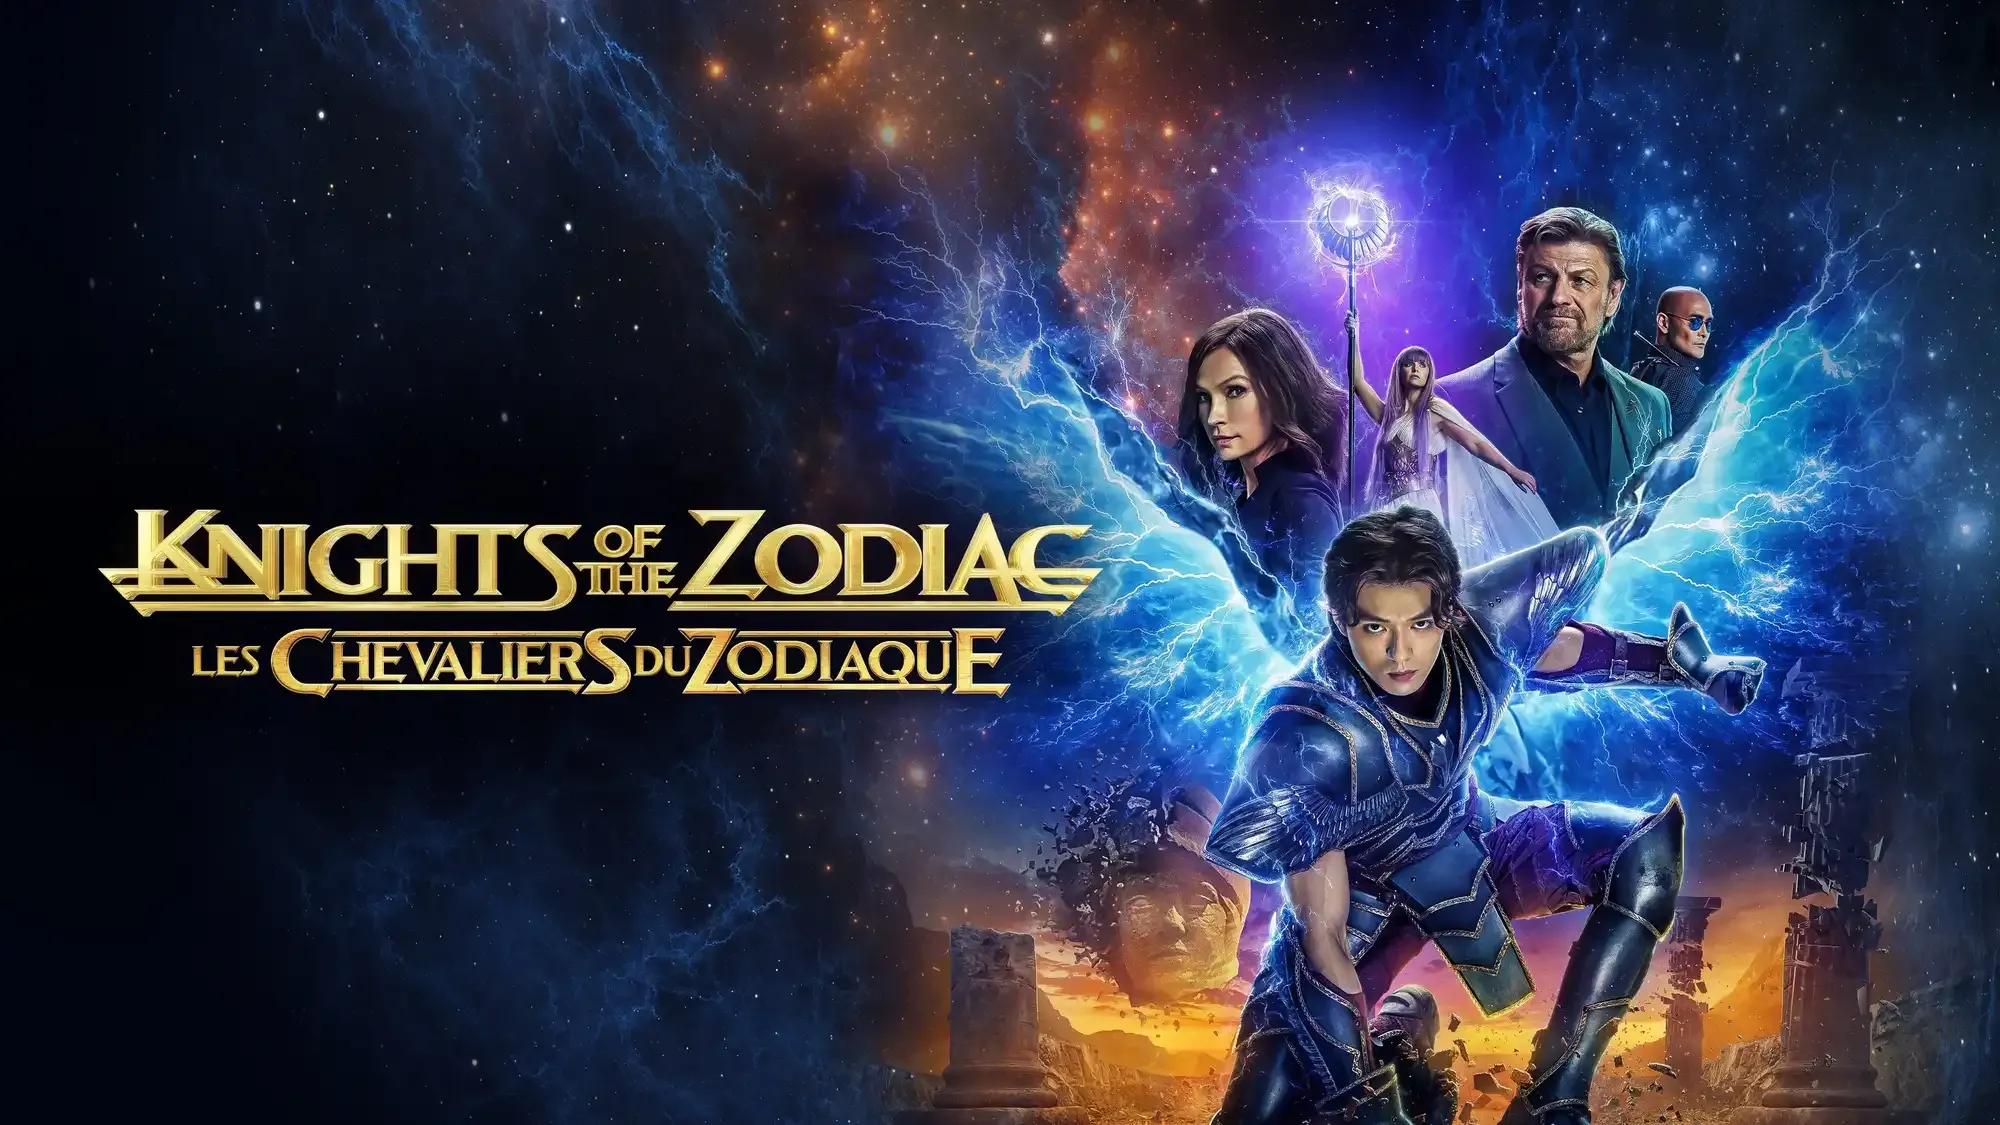 Knights of the Zodiac movie review